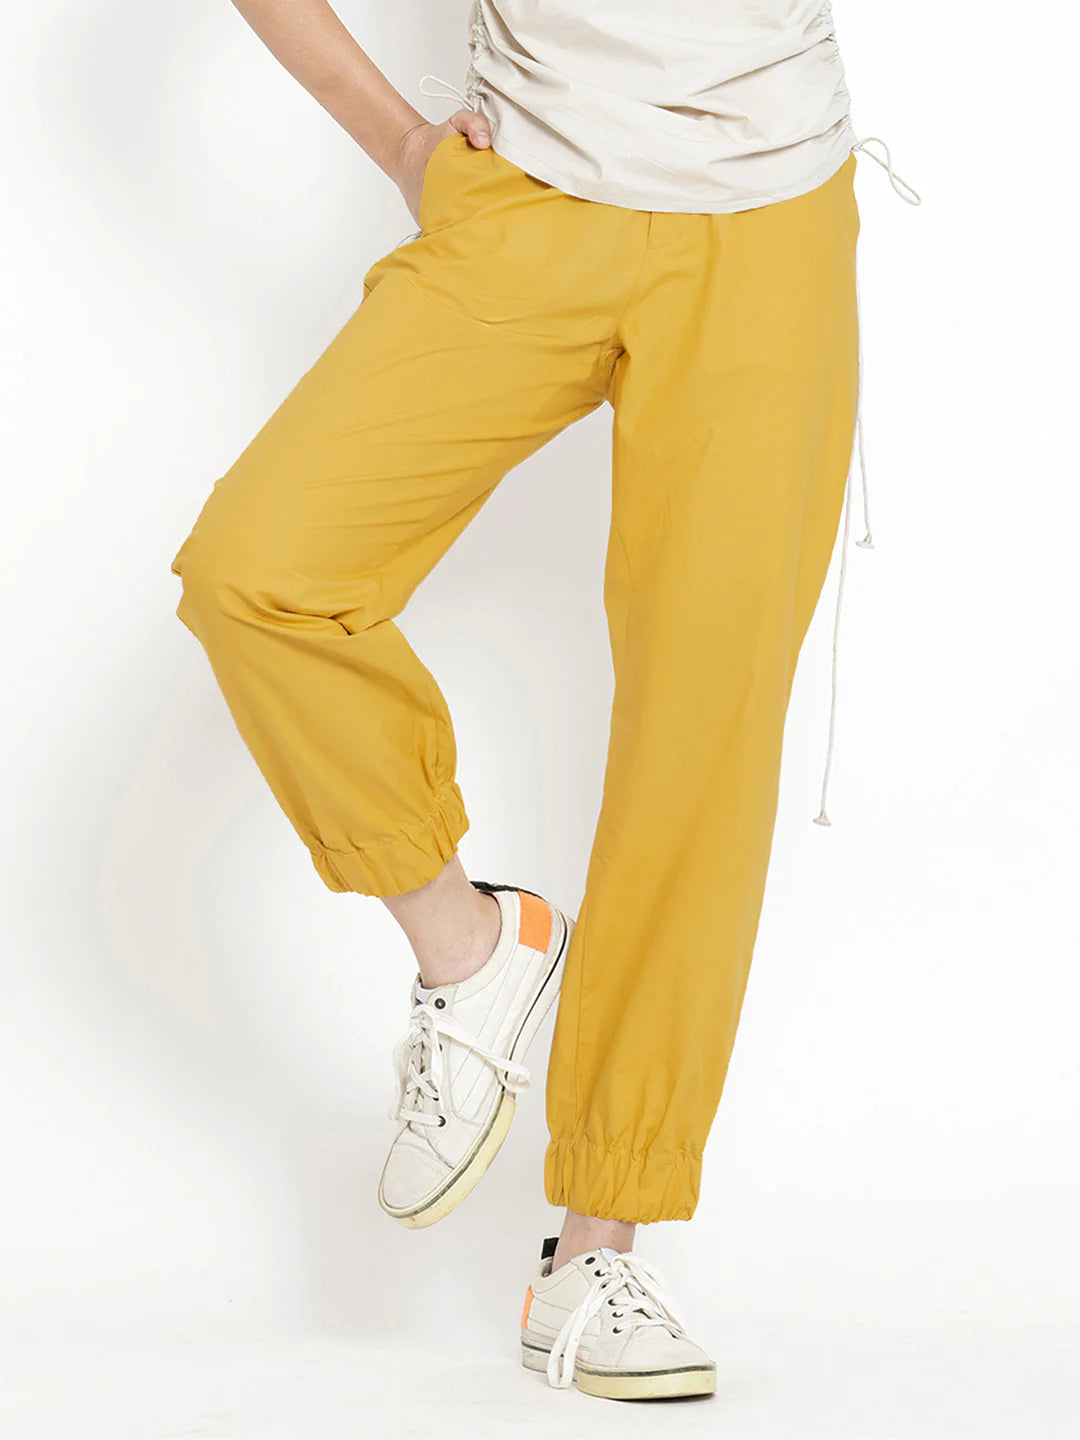 Yellow Jogger Pants for Women | Sunny Day Jogger Pants